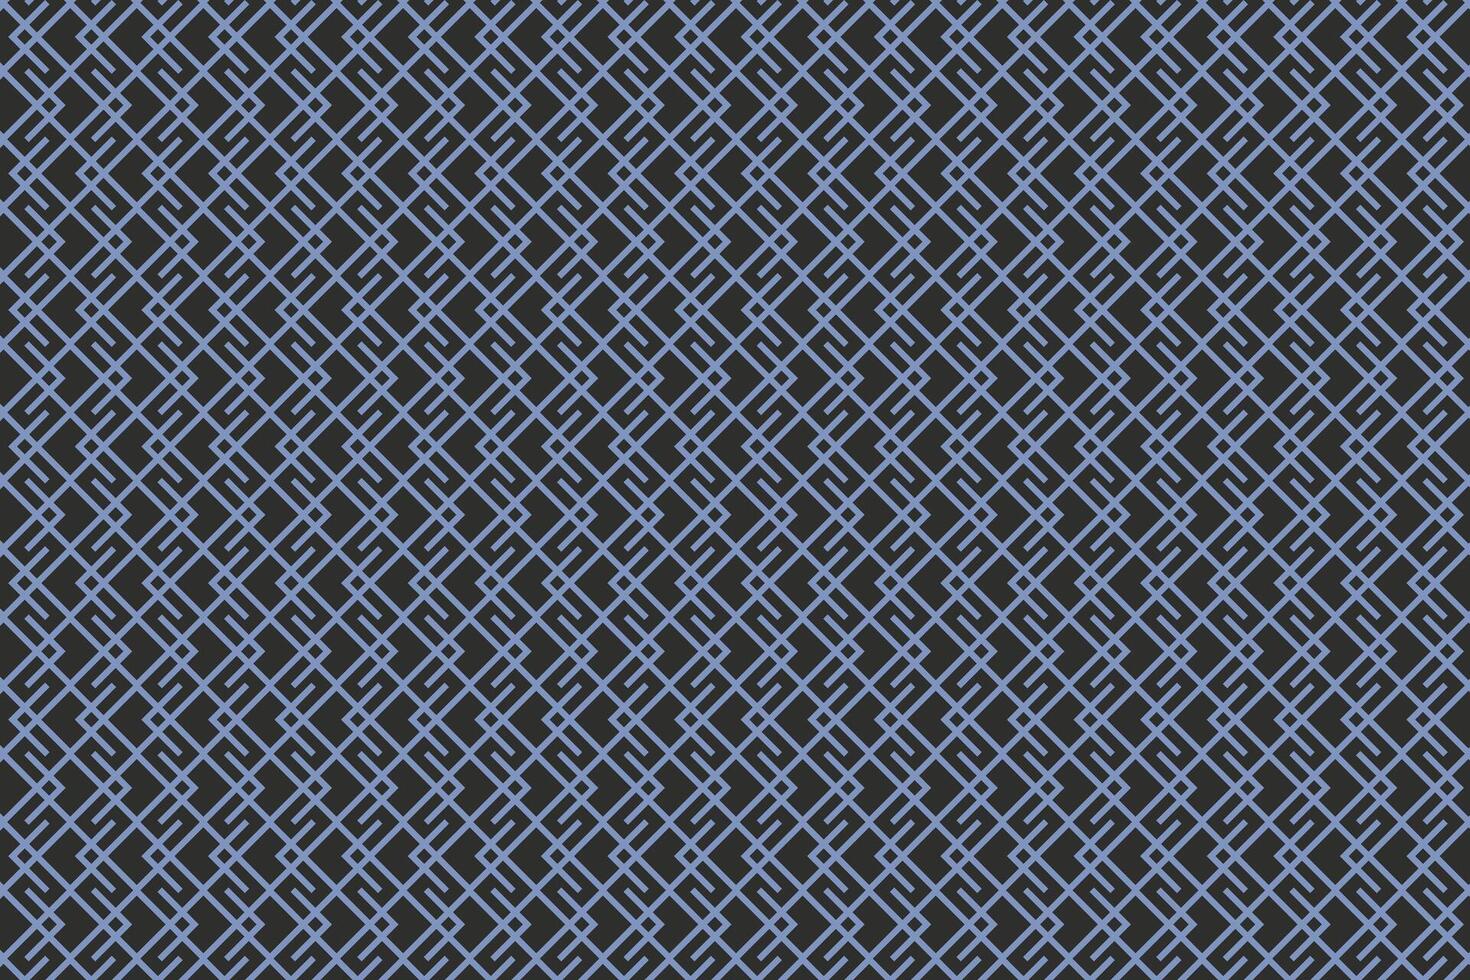 Illustration wallpaper, Abstract Geometric Style. Repeating Sample blue line on black background. vector